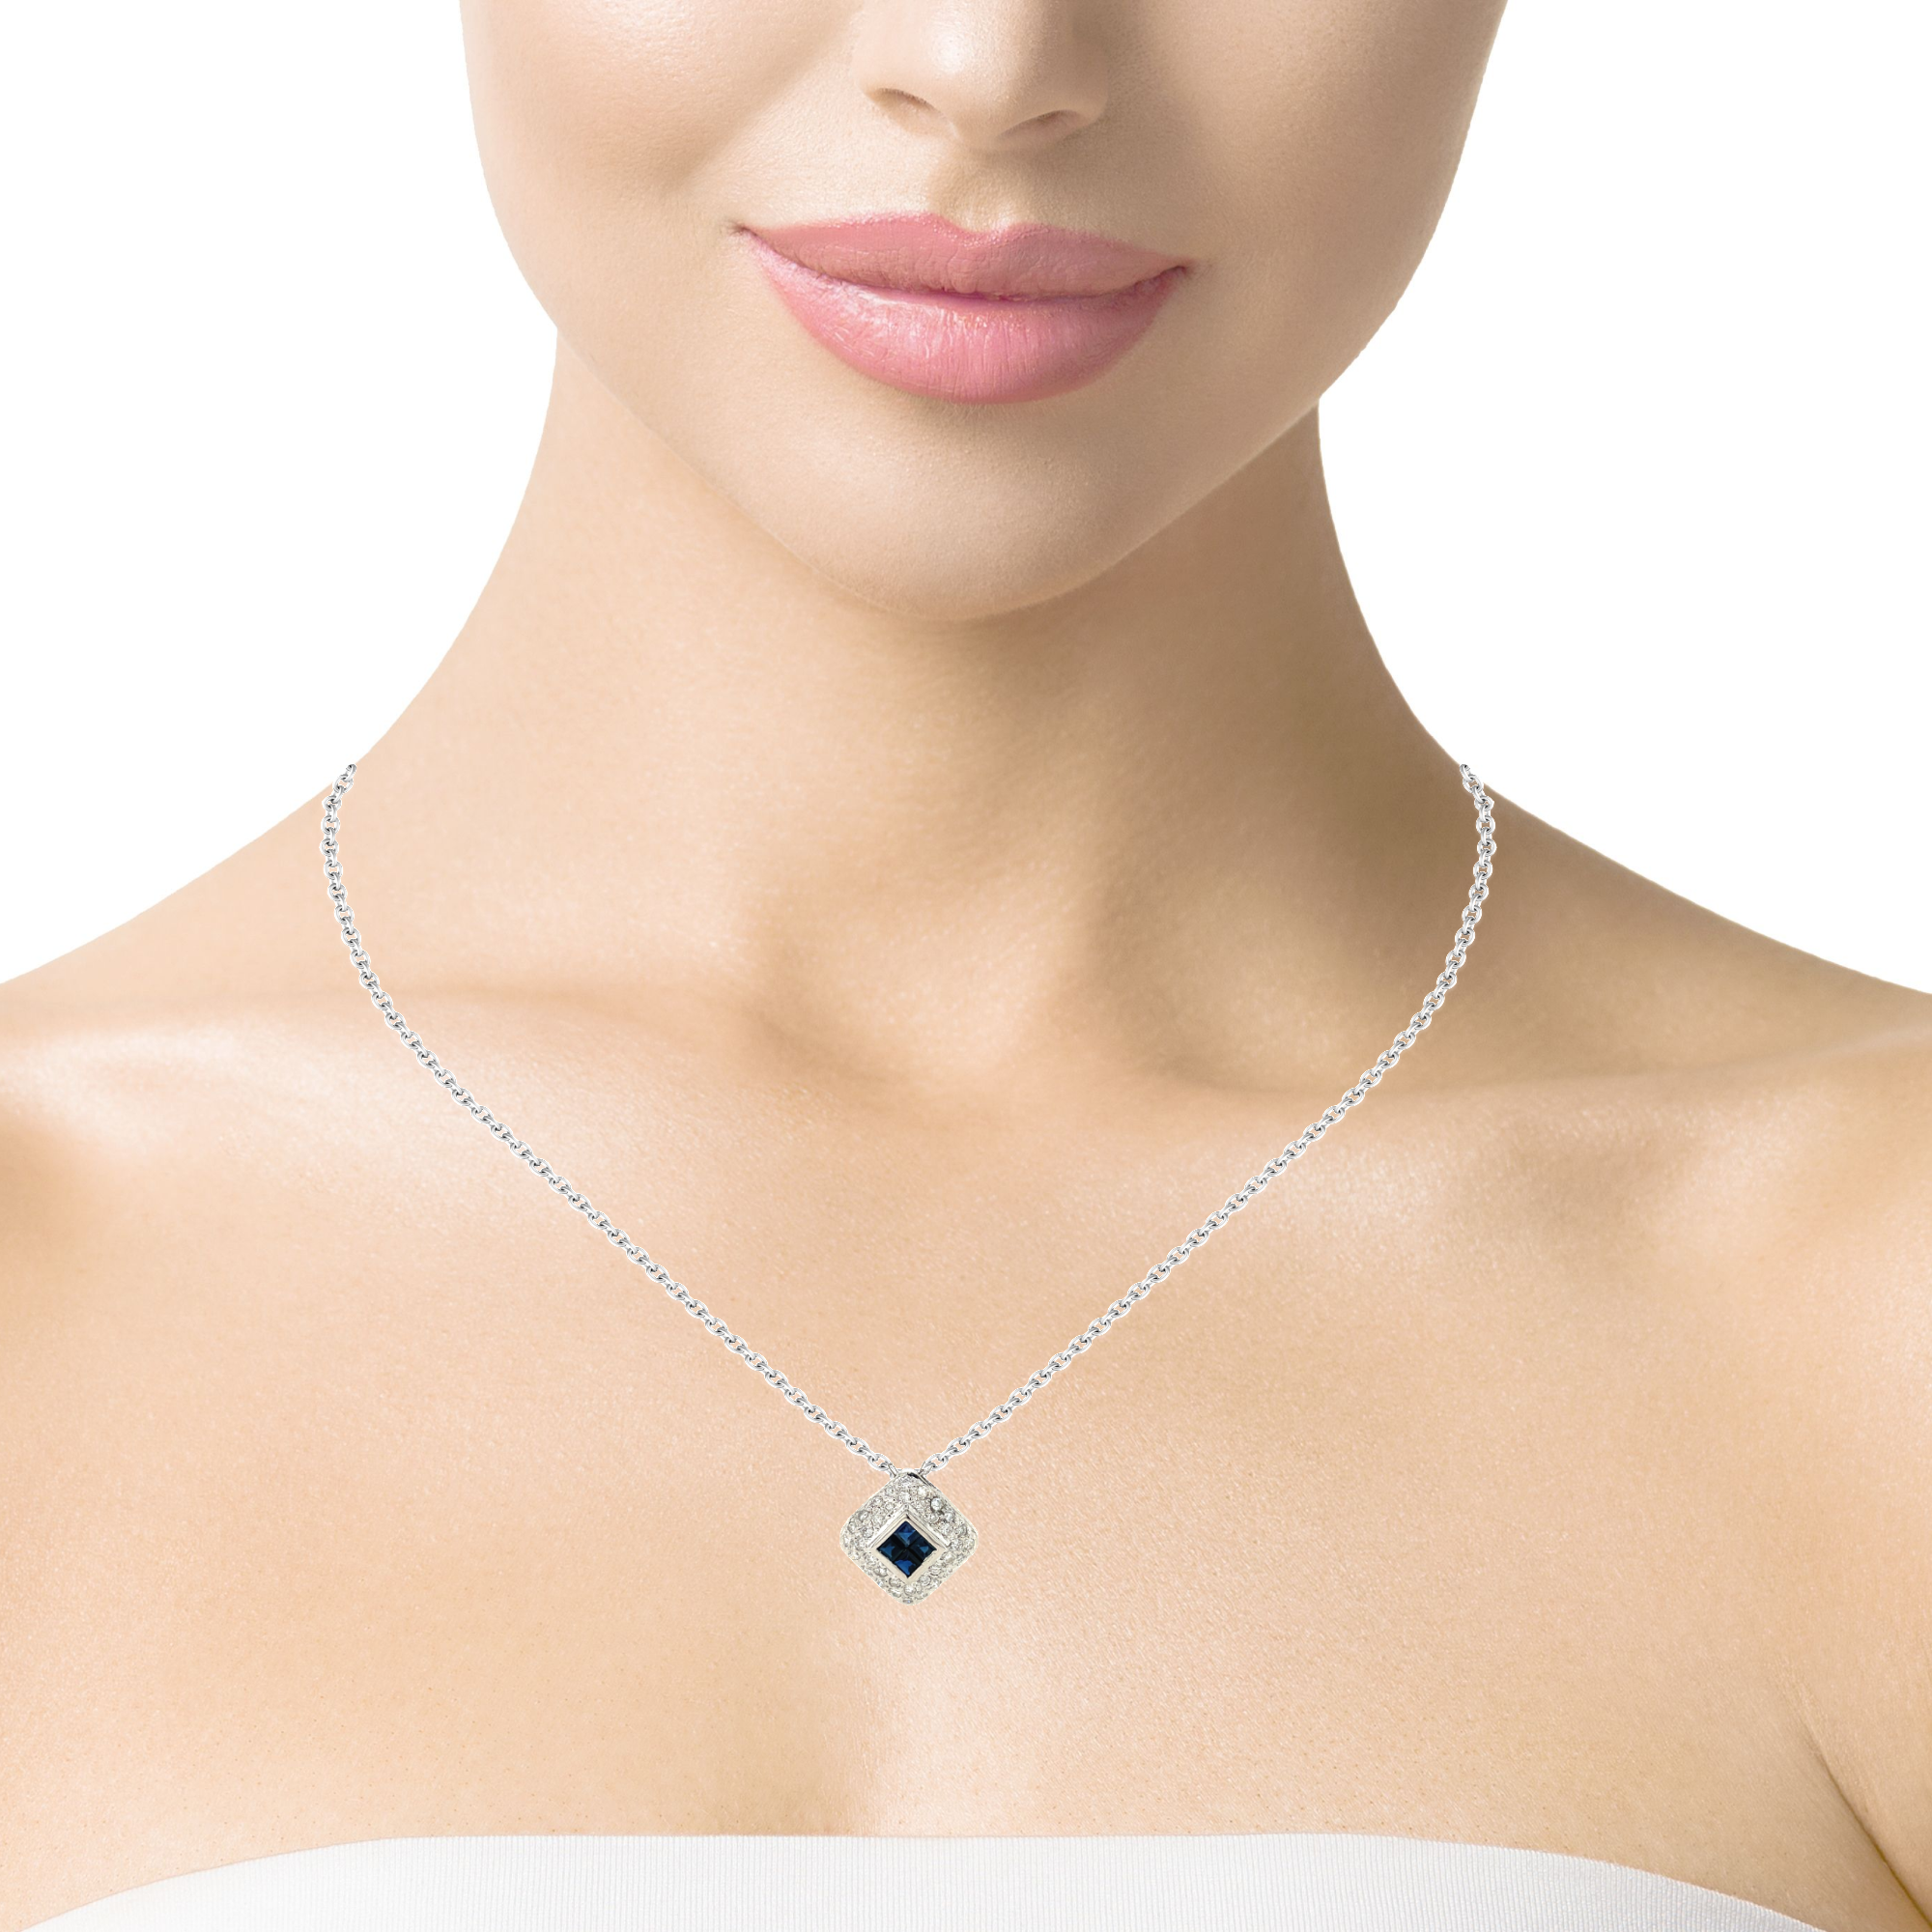 This stunning 14k white gold pendant necklace features 0.20 cts of round diamonds in E/F color and 0.70 cts of princess cut sapphires. Create elegant looks with the modern design of this tilted pendant necklace.